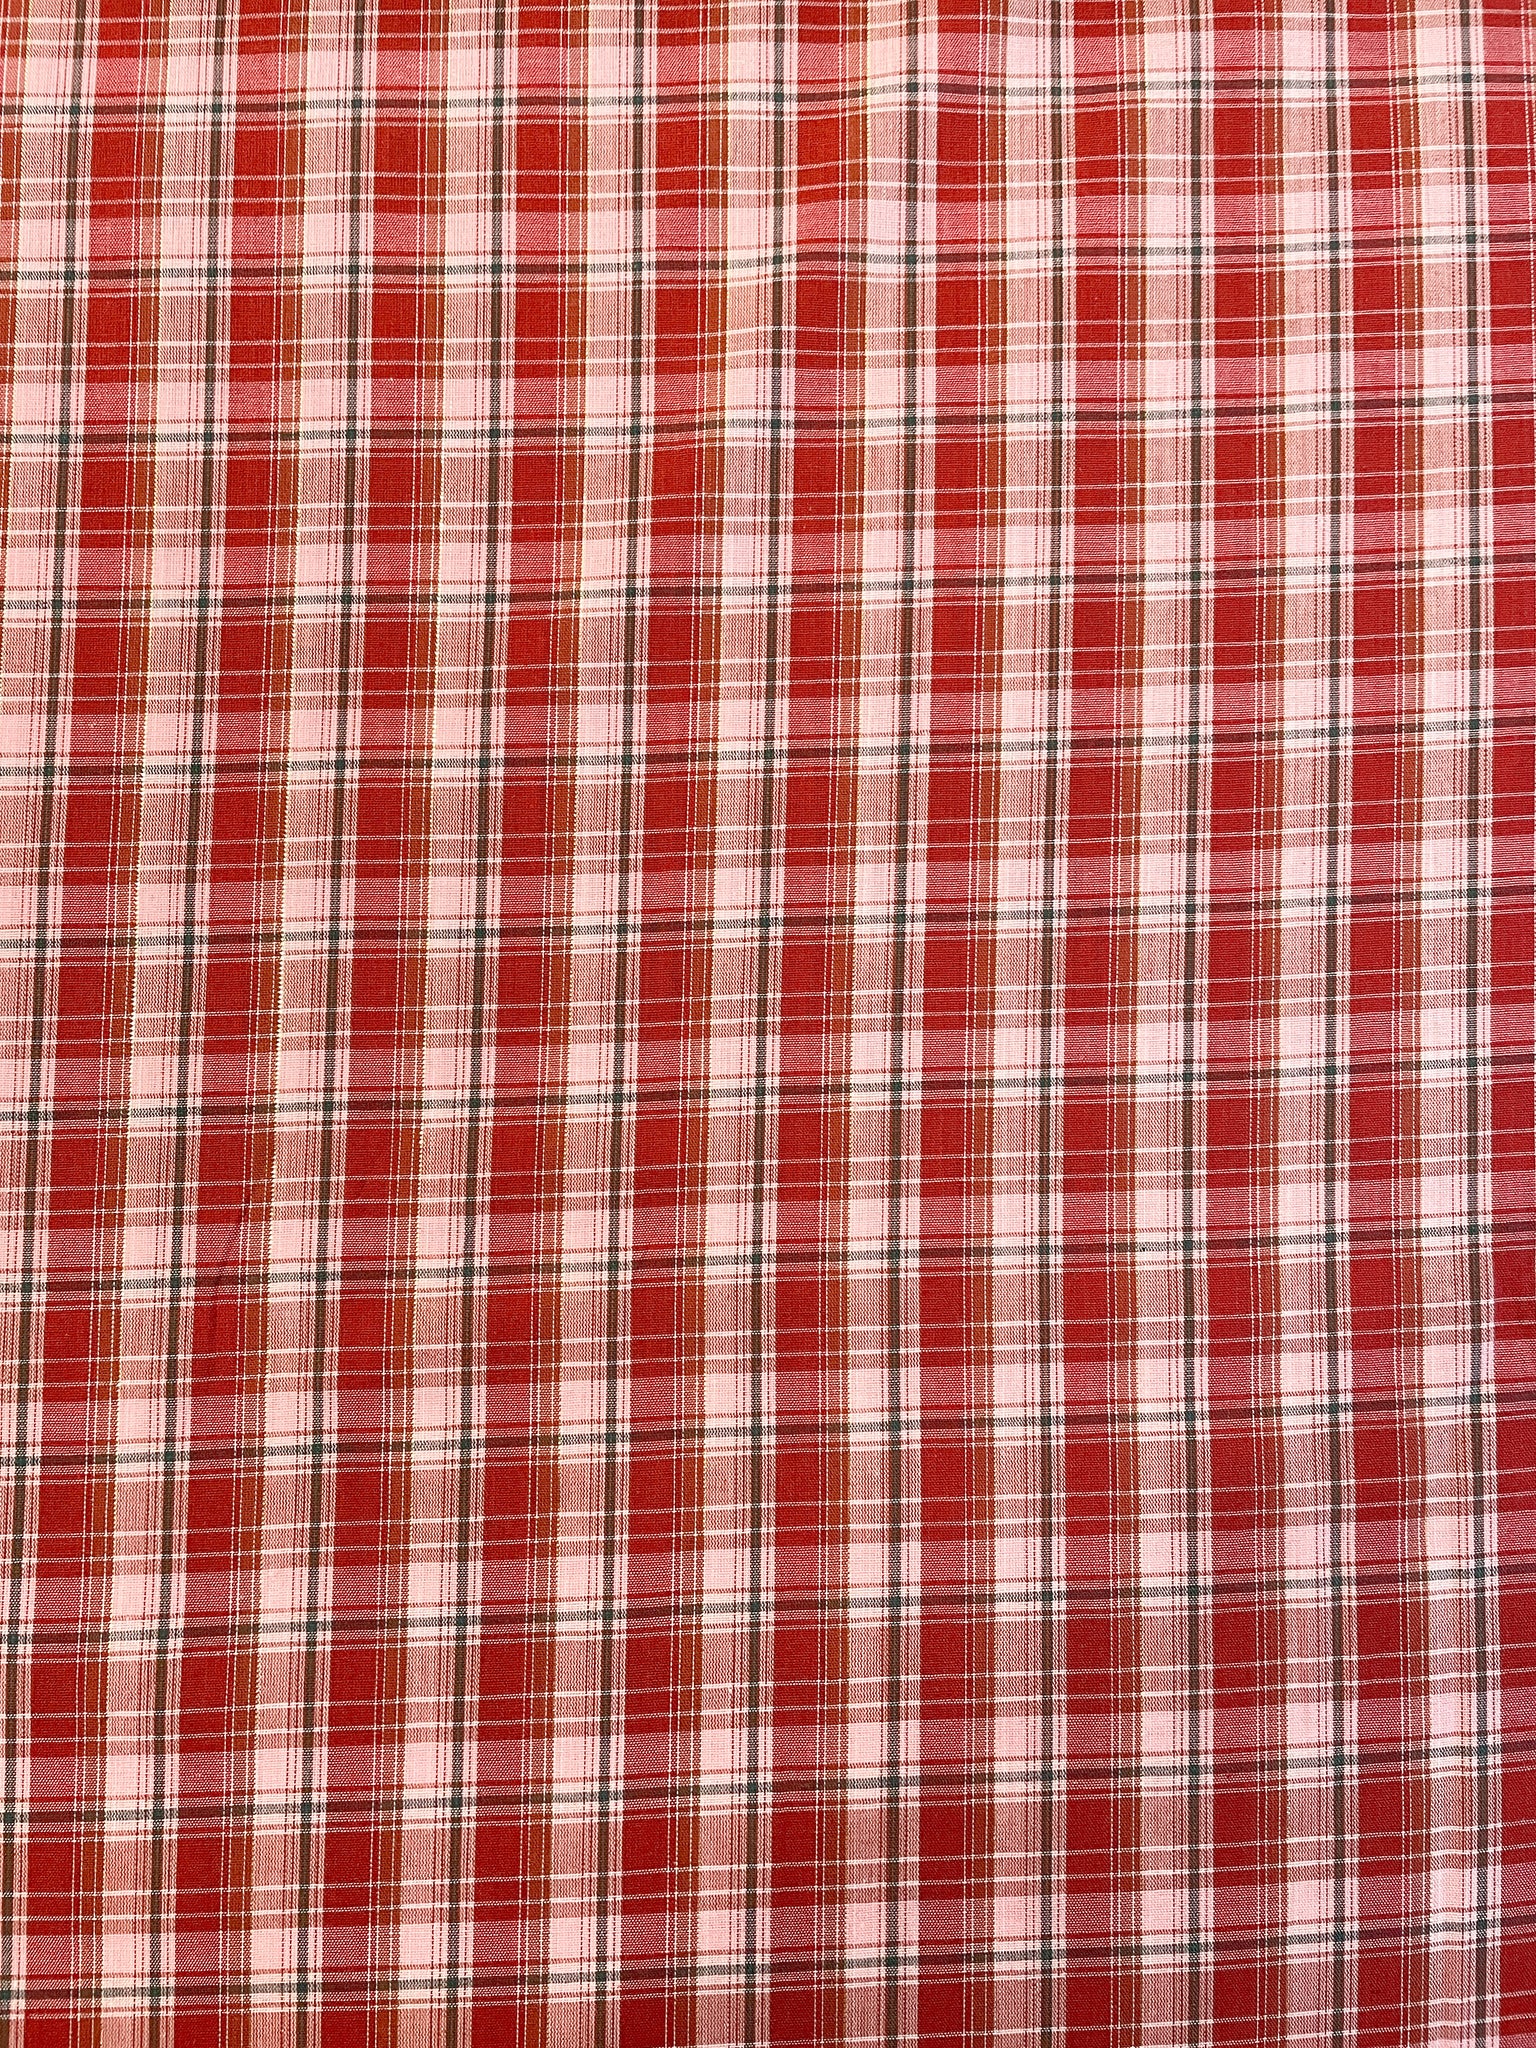 SALE Cotton Yarn Dyed Plaid - Red and Pink Plaid with Gold Lurex